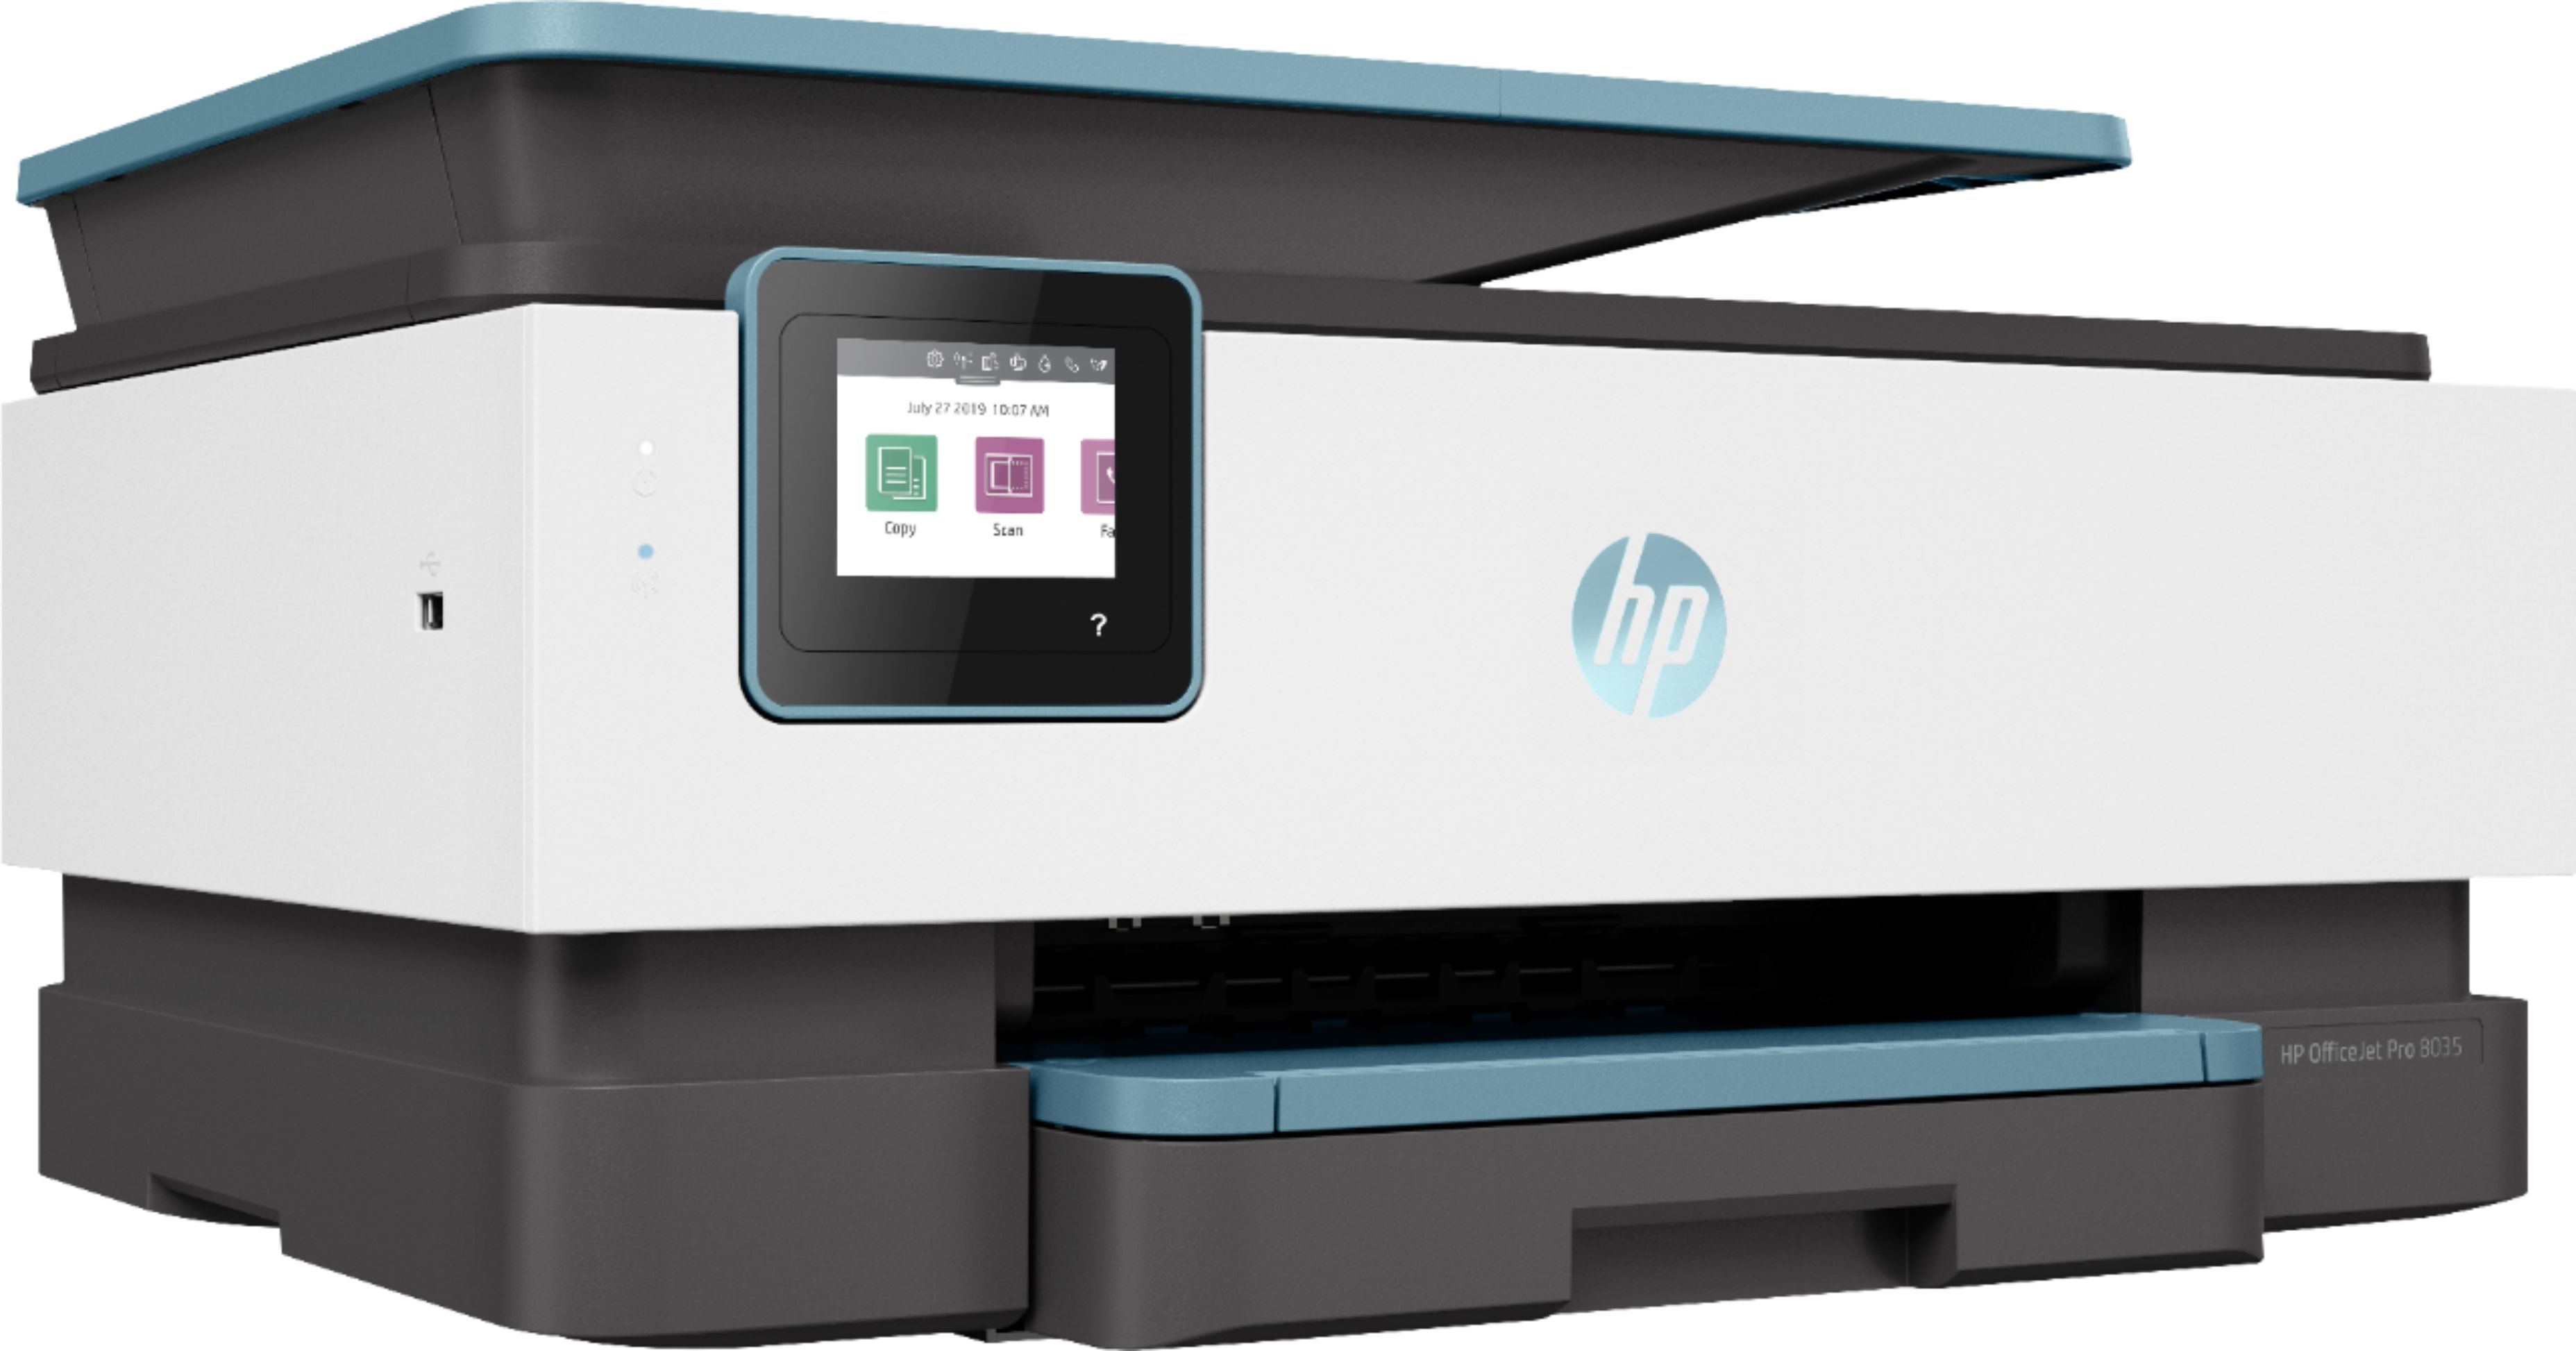 Angle View: HP - ENVY Photo 7155 Wireless All-In-One Instant Ink Ready Inkjet Printer with 5 Months Instant Ink Included - Black